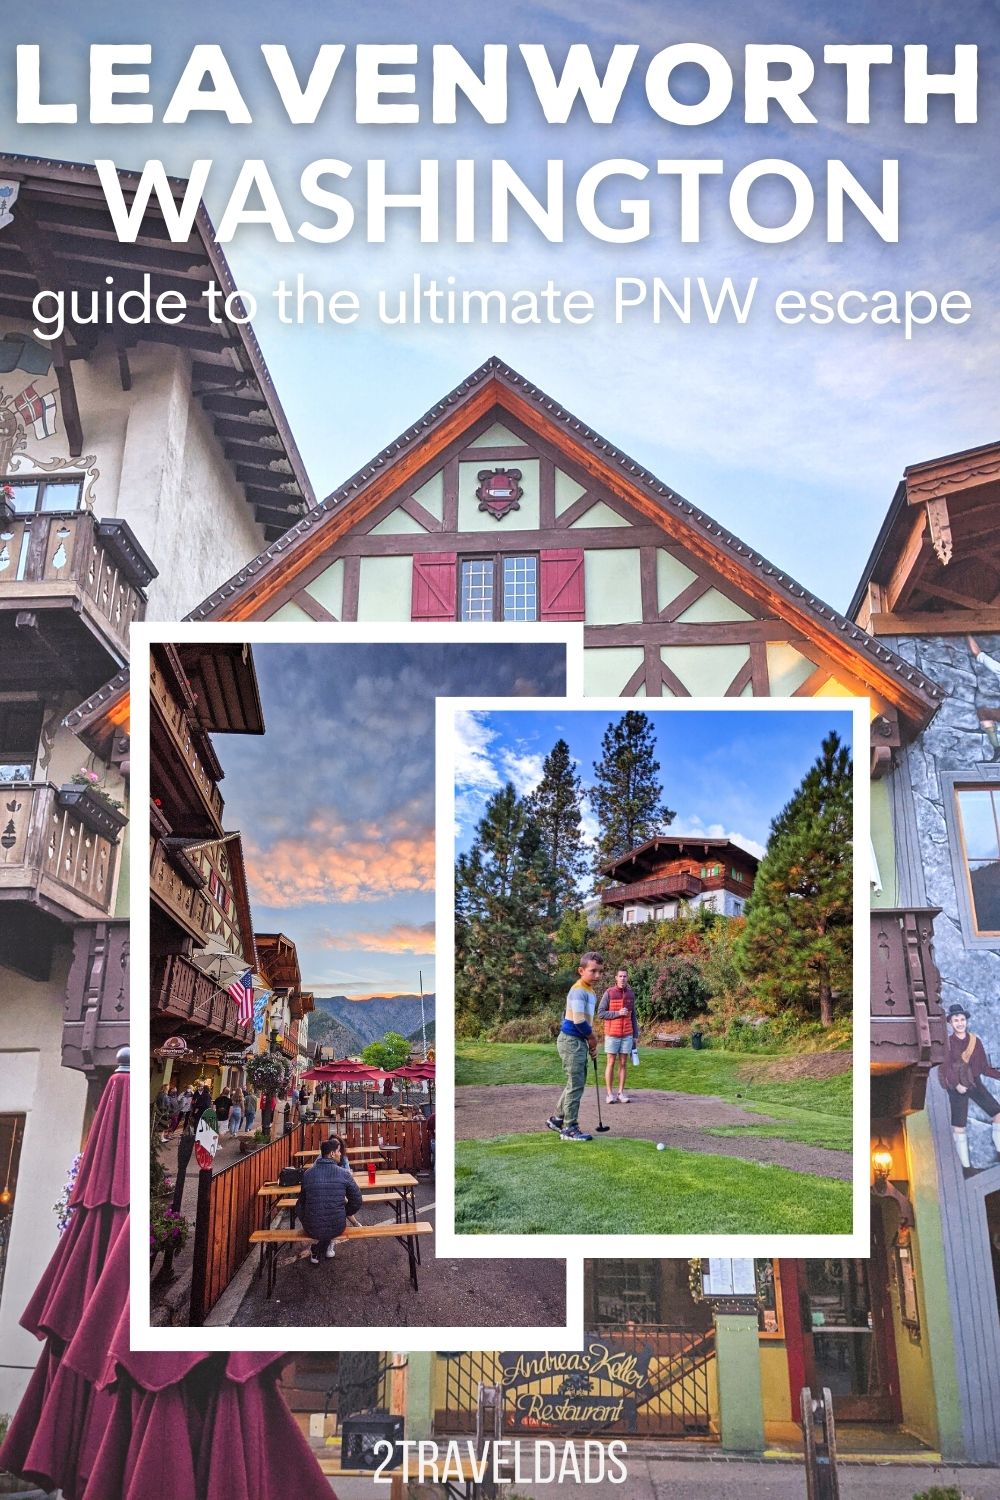 The best things to do in Leavenworth, Washington are Bavarian, outdoorsy and uniquely Pacific Northwest. Find out more about the fun lodges and camping options, unique tourist activities, and great food that make it a year round vacation destination.